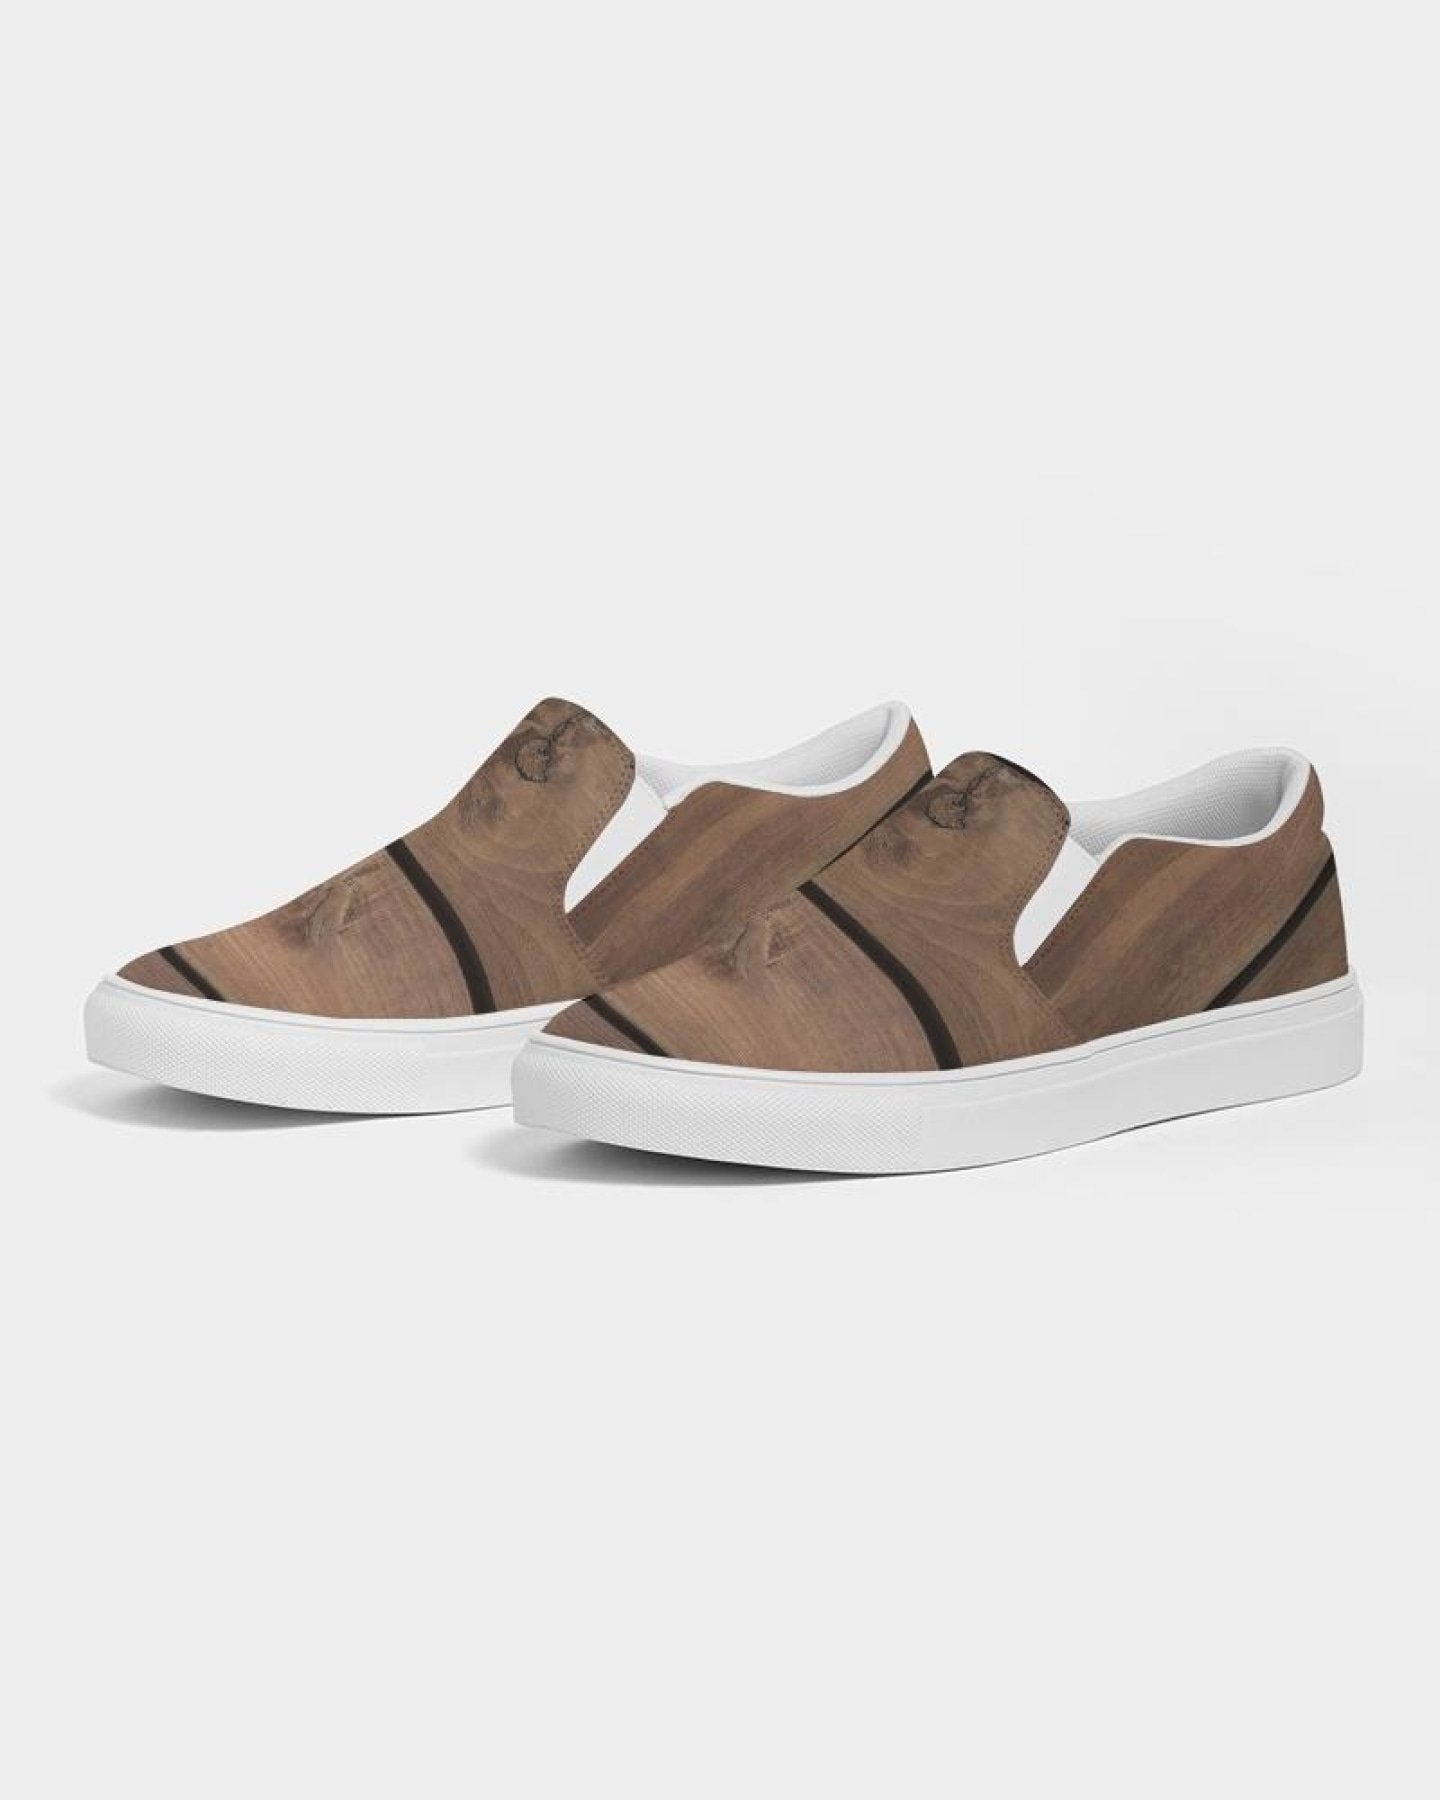 Uniquely You Womens Sneakers - Brown Plank Style Canvas Sports Shoes /